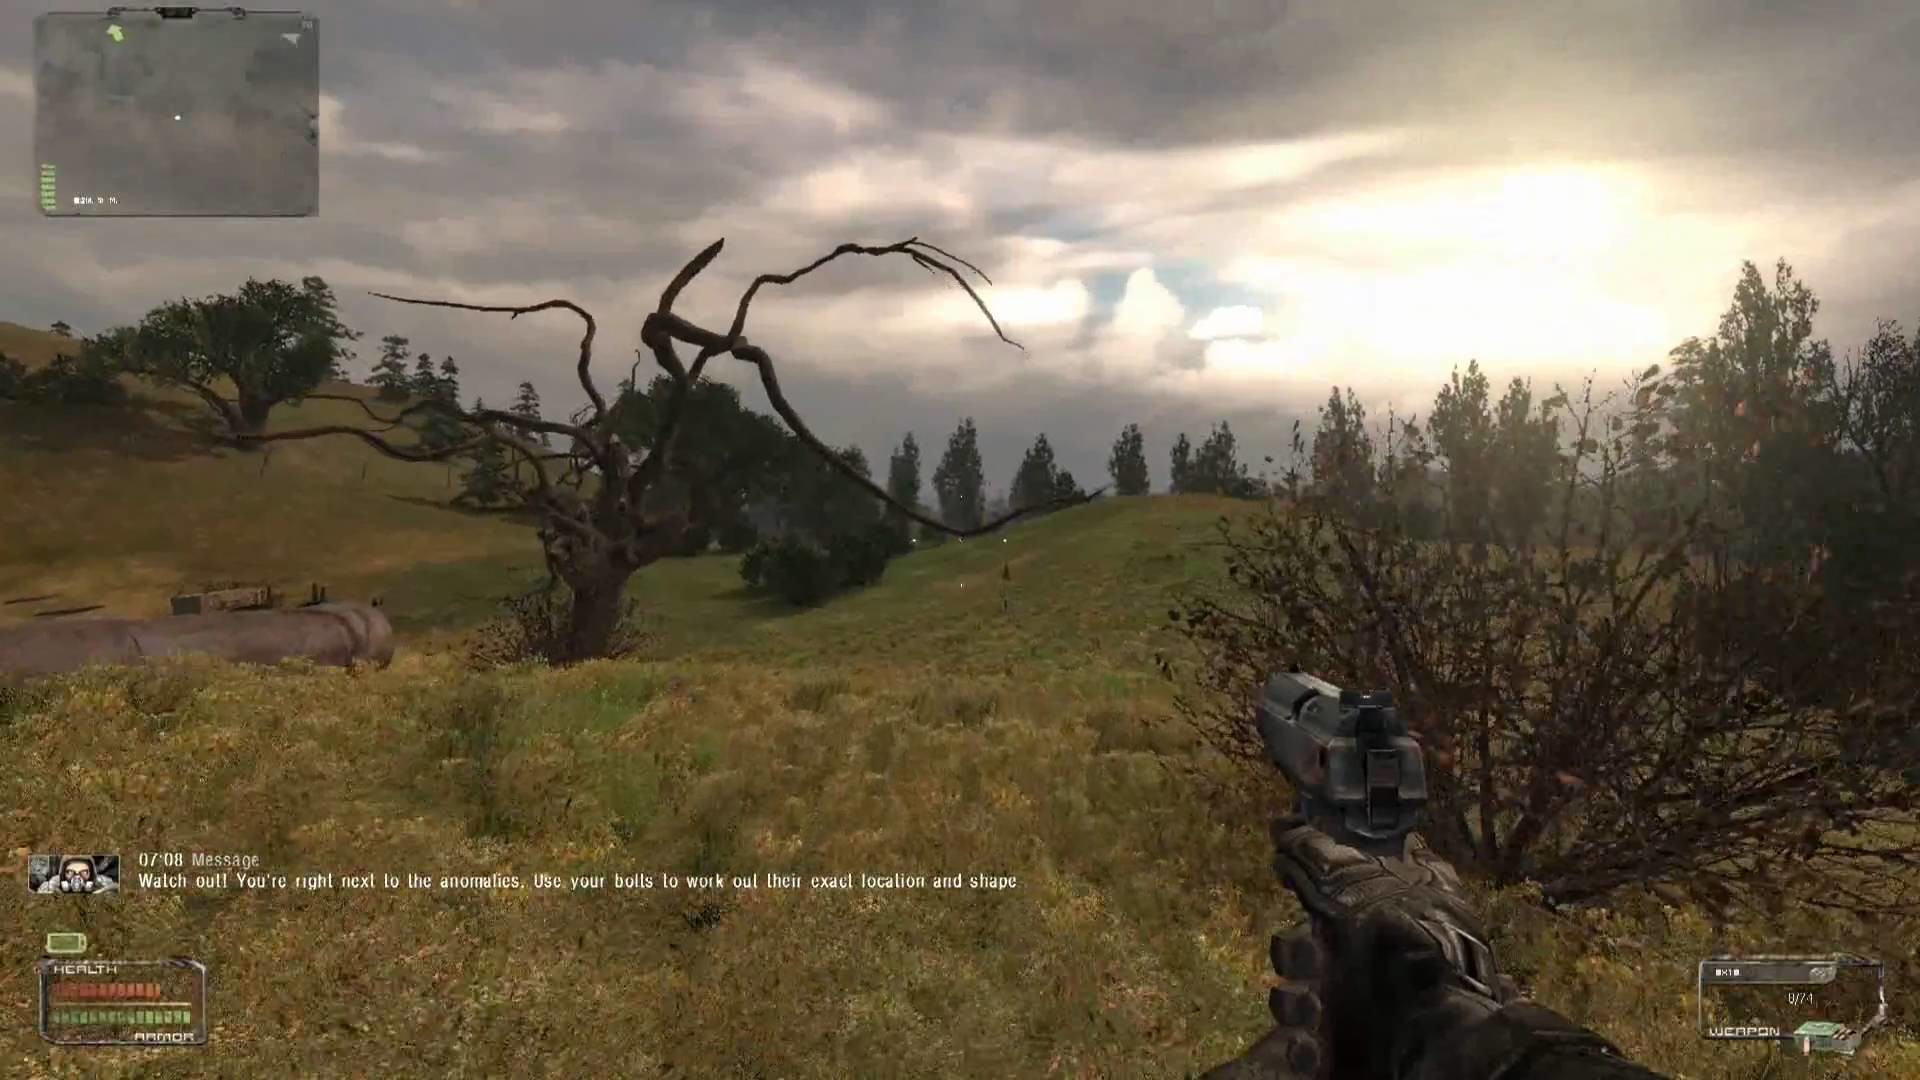 1920x1080 S.T.A.L.K.E.R SOC with Complete 2009 MOD in FULL HD and MAX settings (DX9)  on Radeon HD 4850 512mb